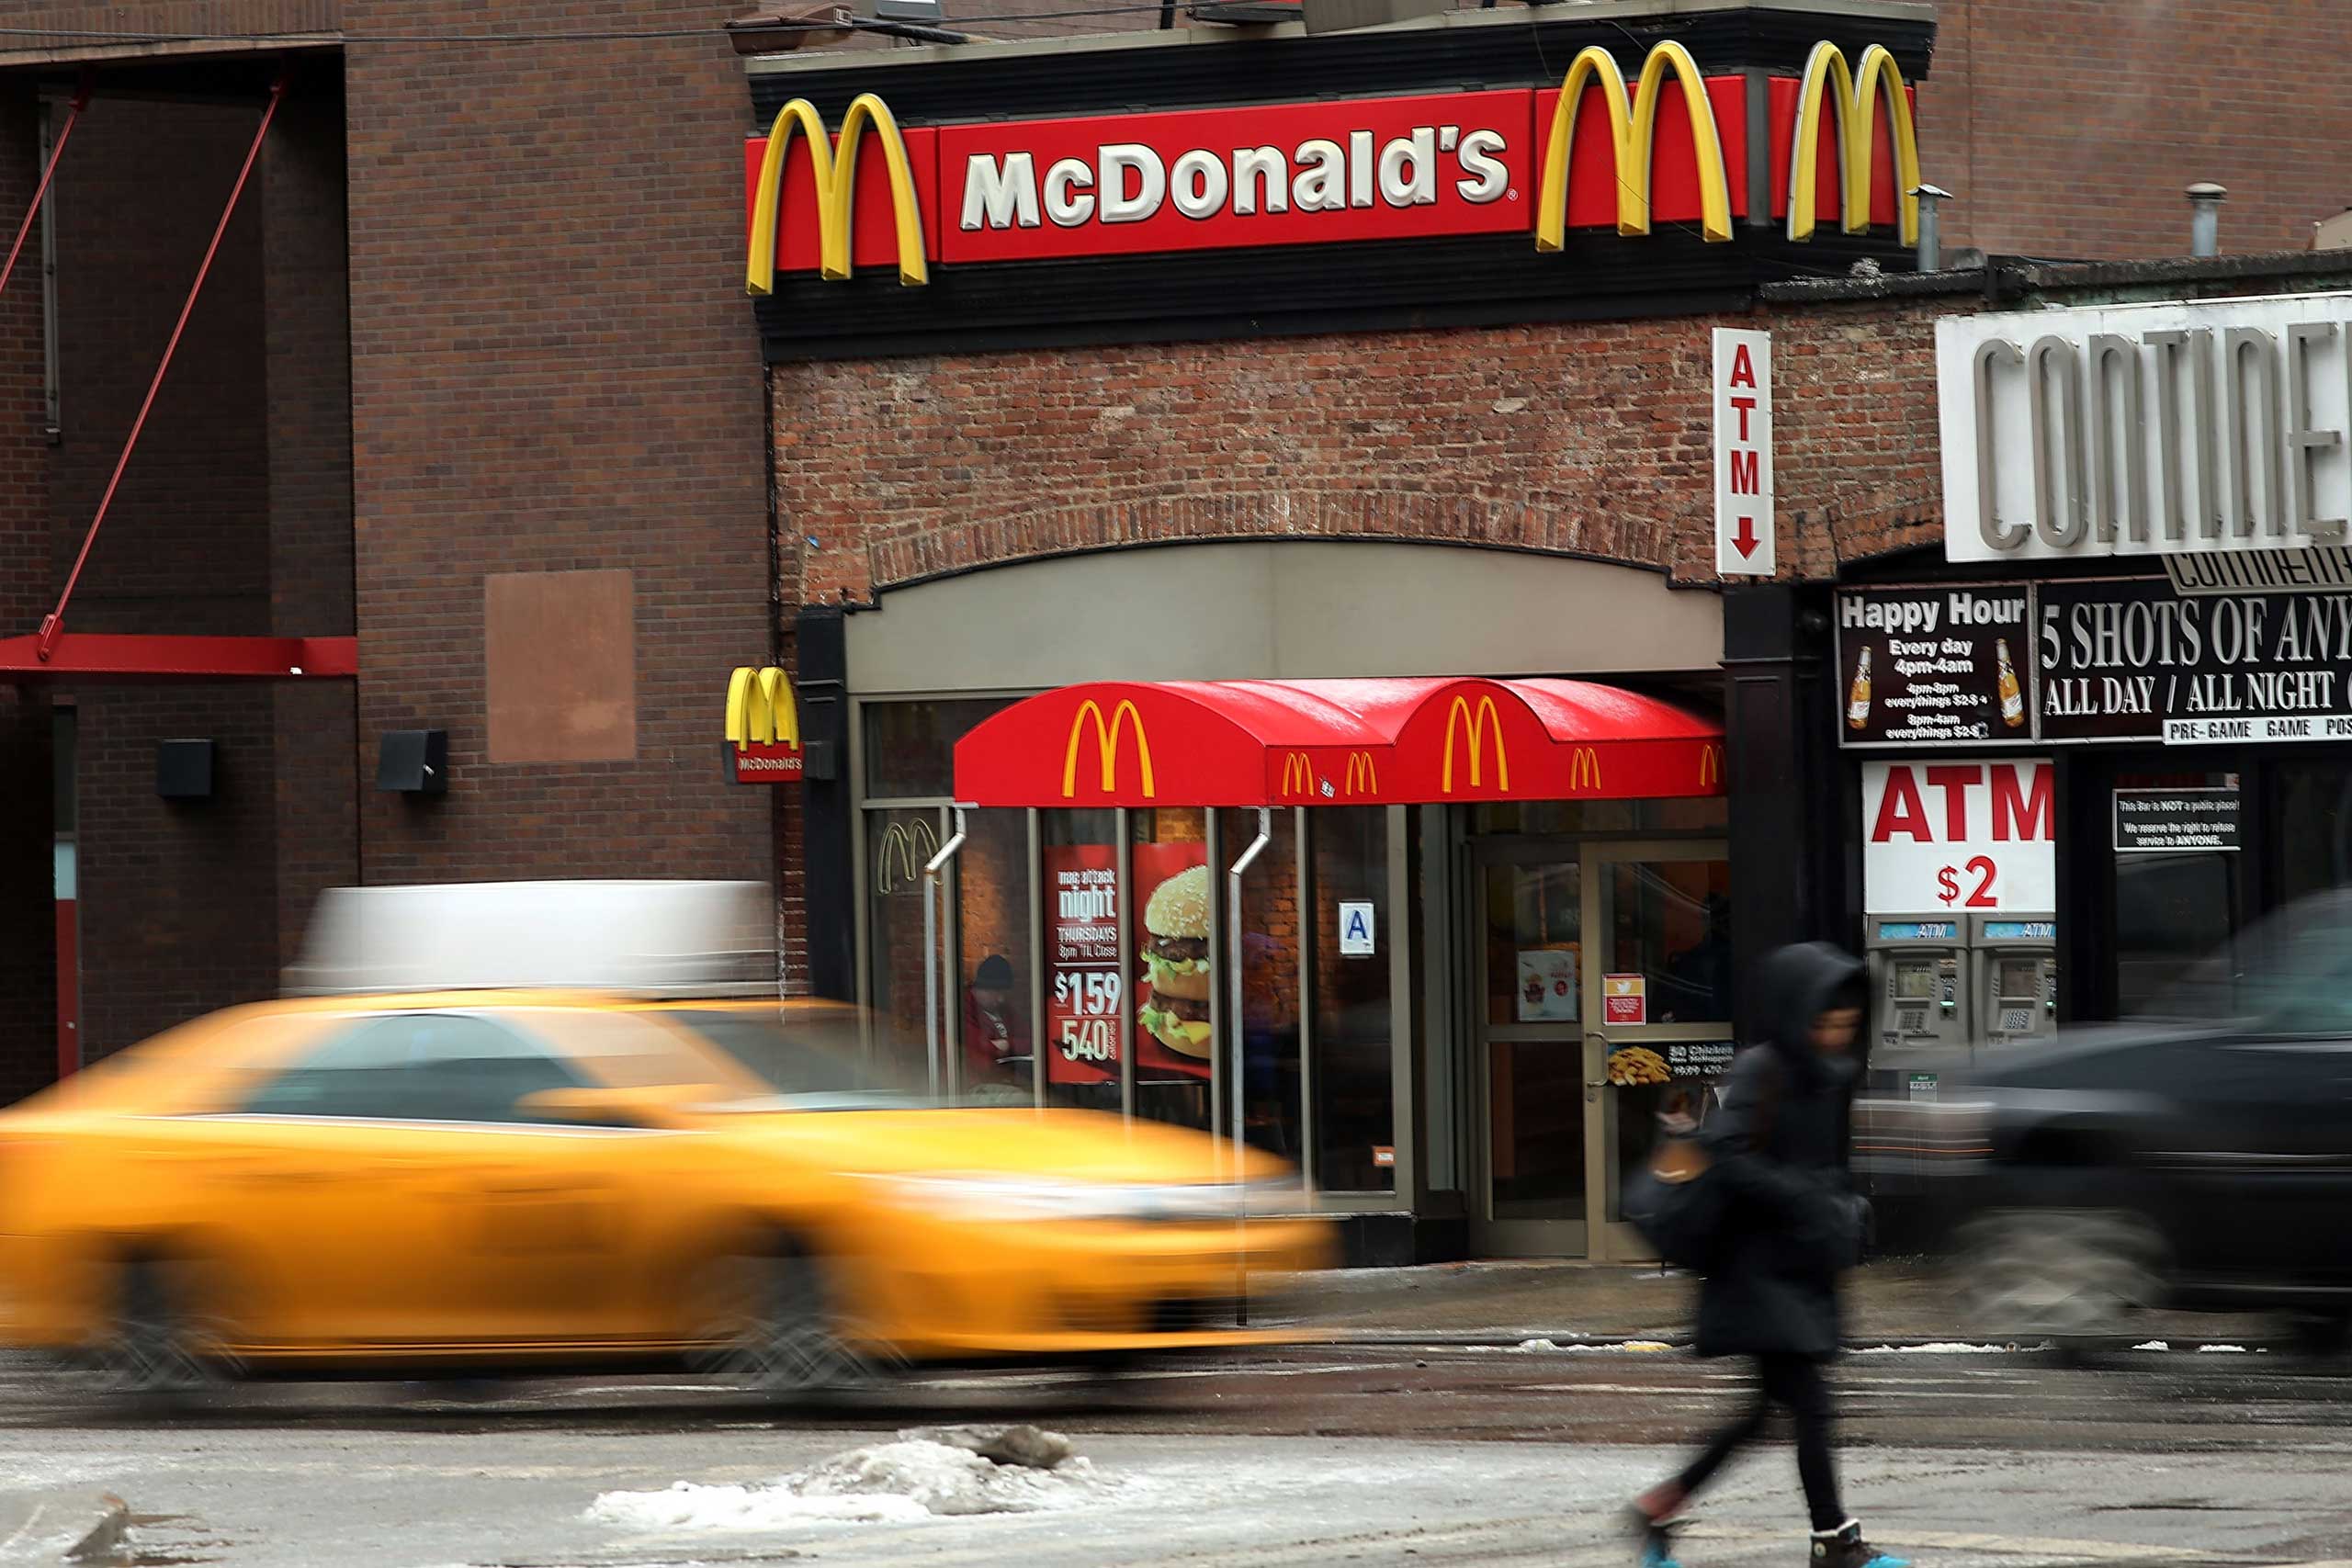 Cars move past a McDonald's in lower Manhattan on February 9, 2015 in New York City.